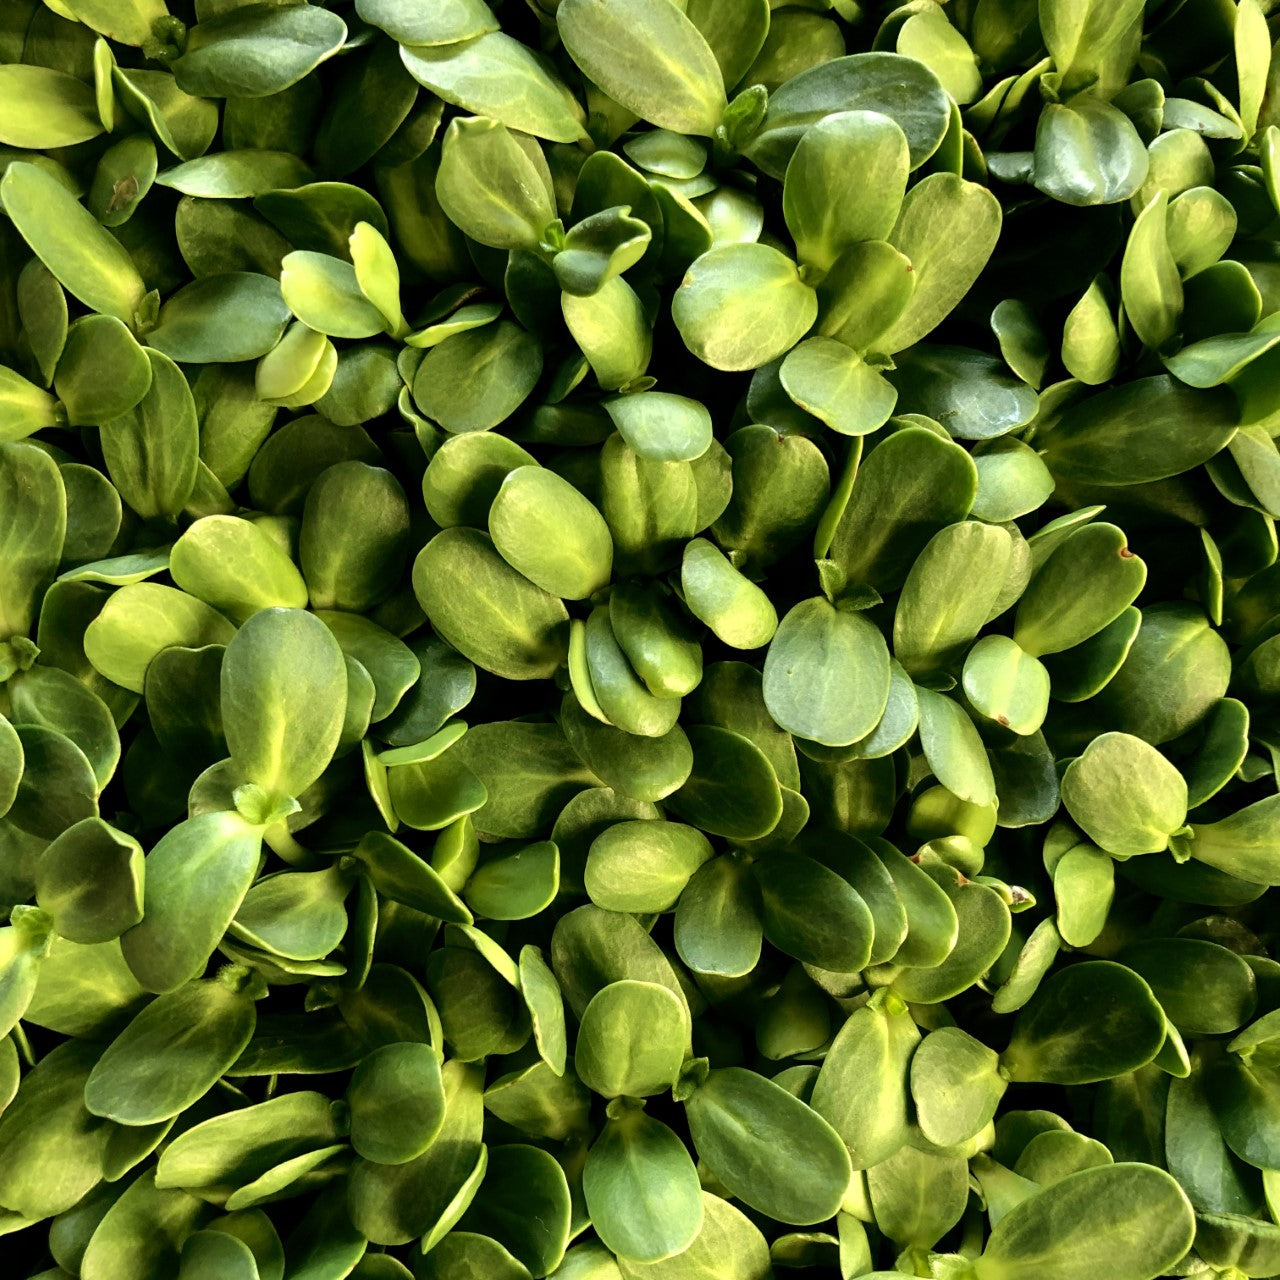 Sunflower microgreens have long thick white stems with bright green oval leaves.